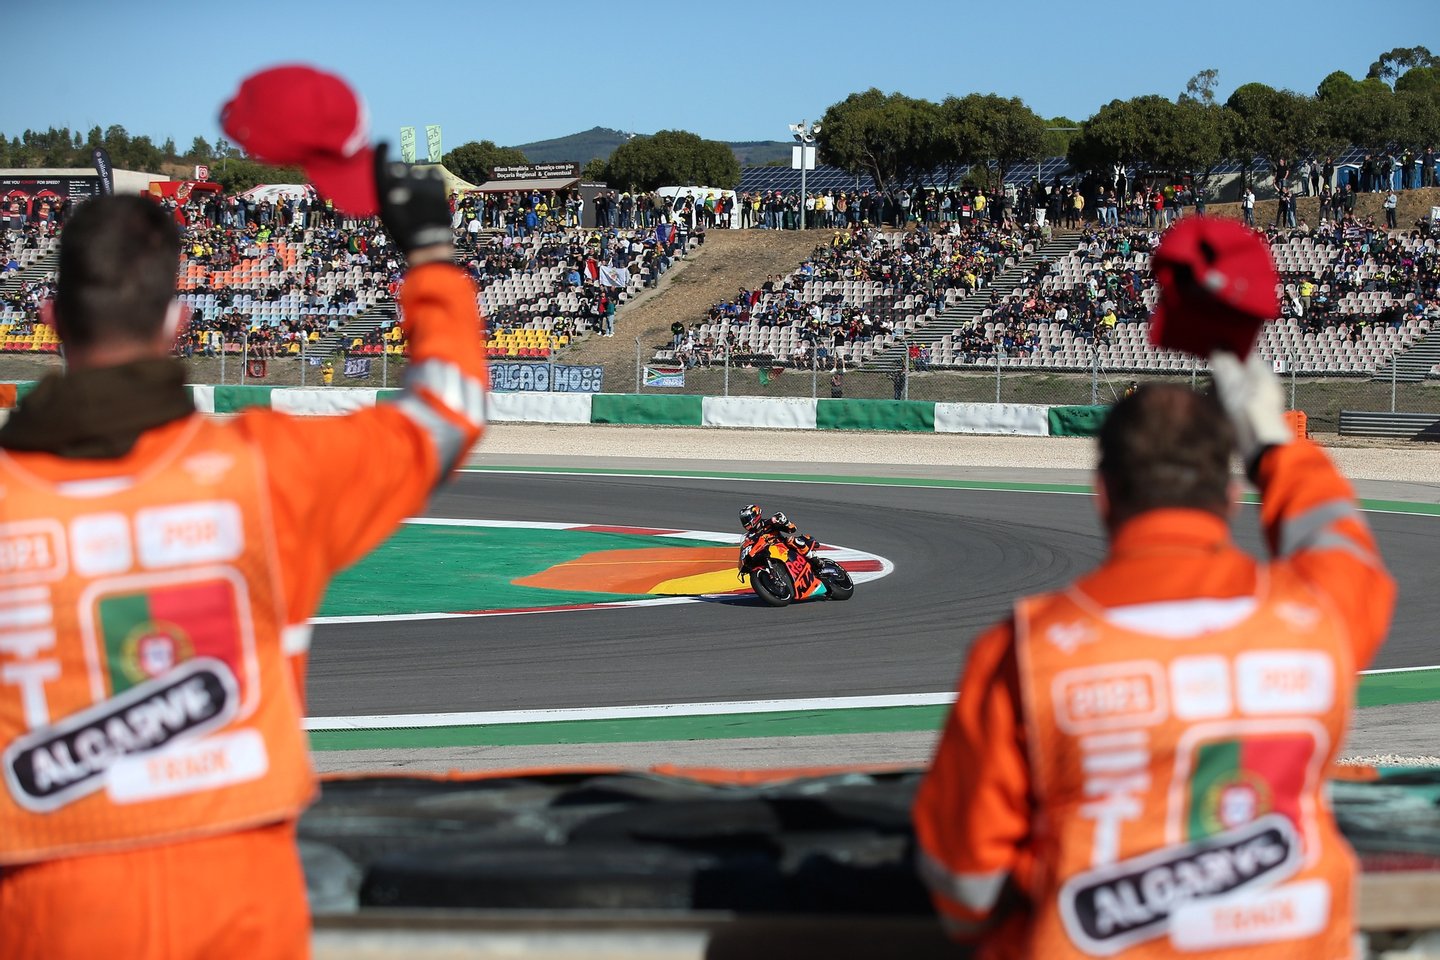 Staff workers waves to Portuguese MotoGP rider Miguel Oliveira of Red Bull KTM Factory Racing team, during the warm up for the Algarve Motorcycling Grand Prix at the Algarve International race track in Portimão, Southern Portugal, 07 November 2021. NUNO VEIGA/LUSA